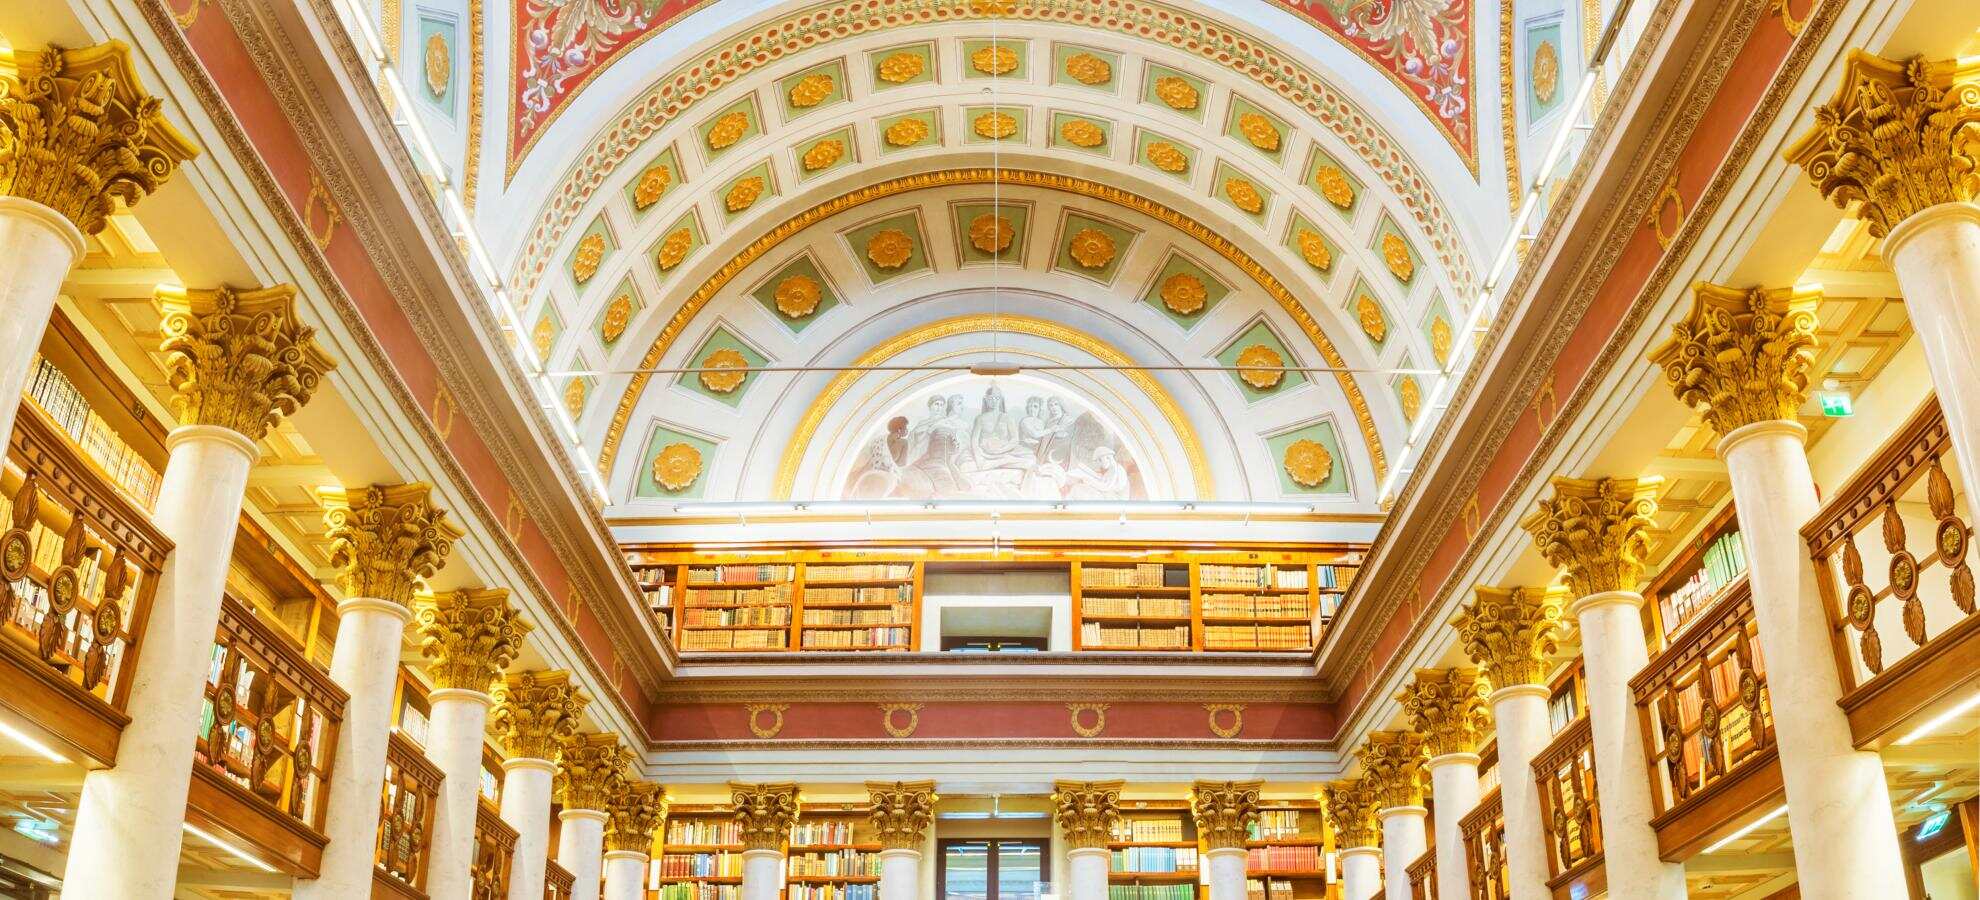 15-astounding-facts-about-national-library-of-finland